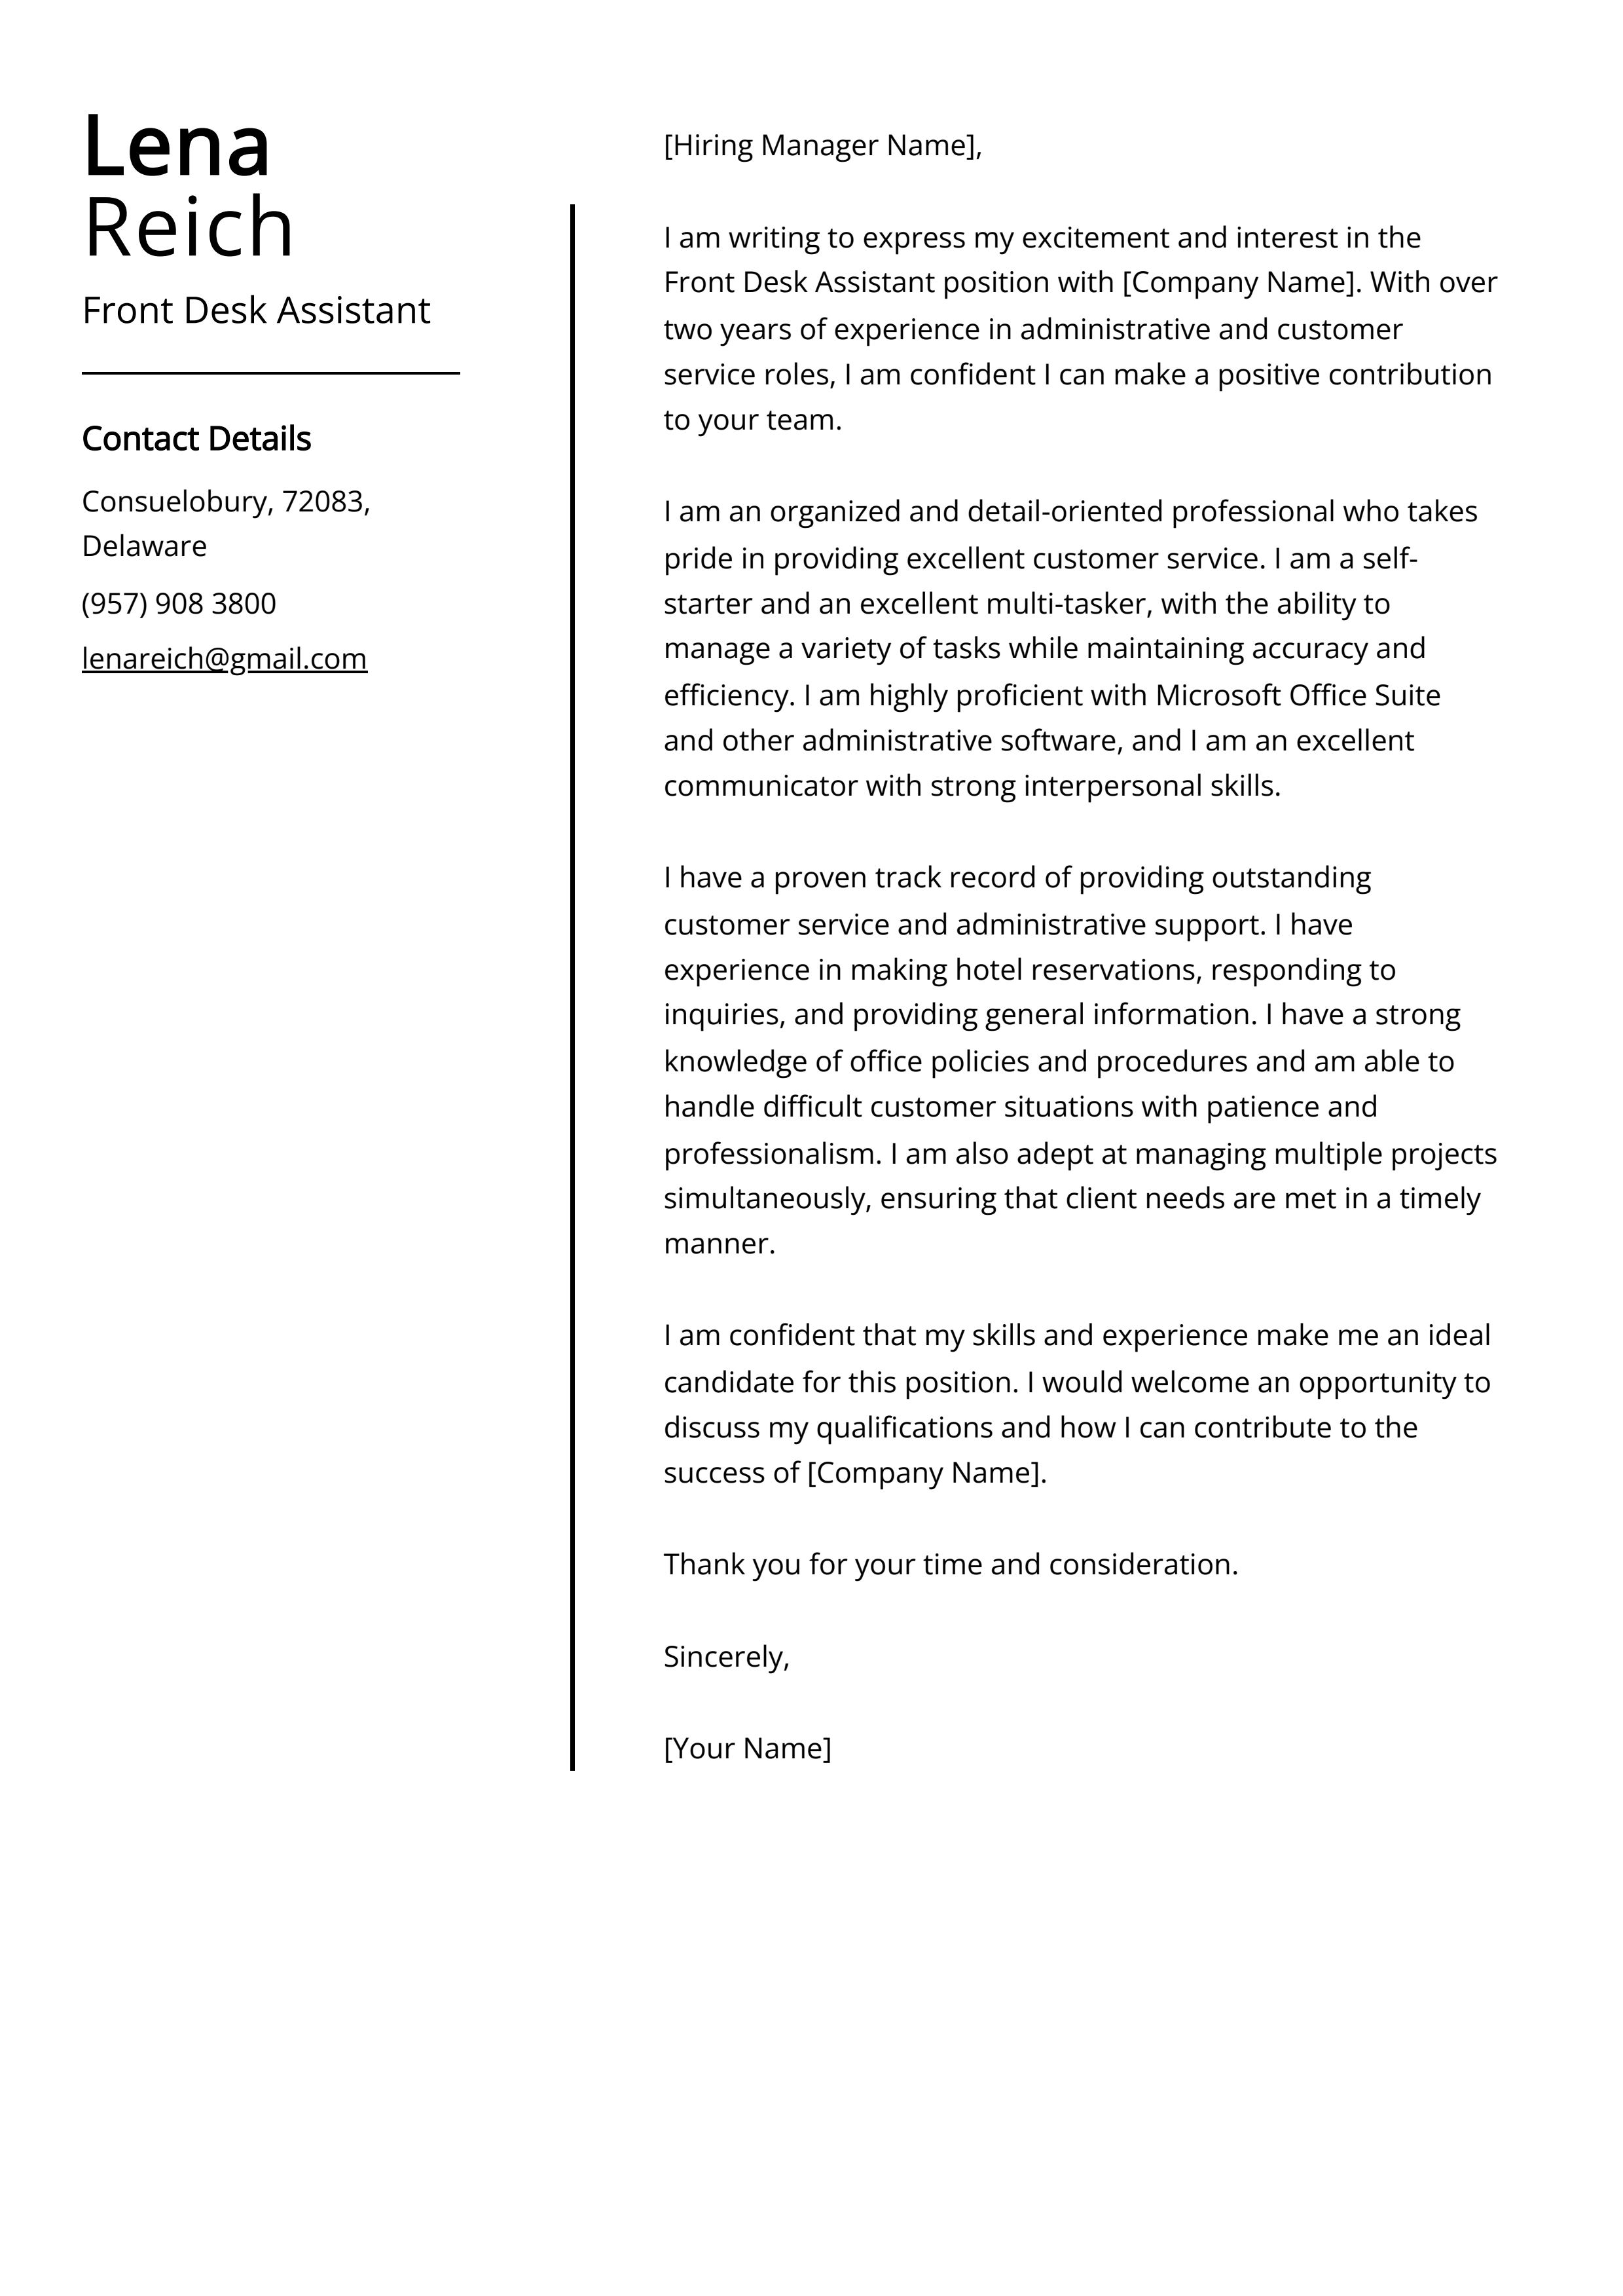 Front Desk Assistant Cover Letter Example